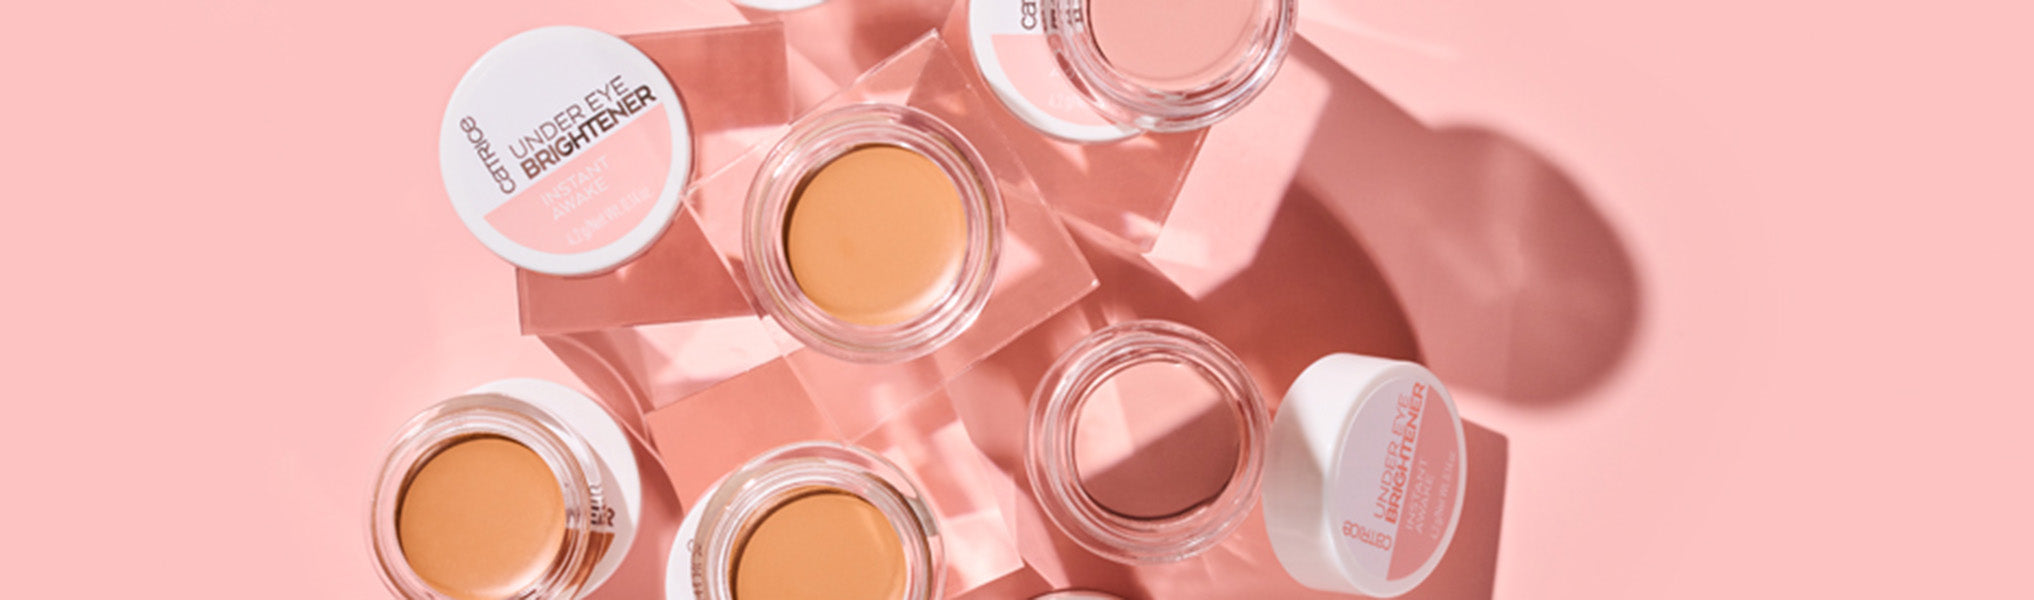 instantly wake eyes up with our under eye brightening concealer that conceals dark circles